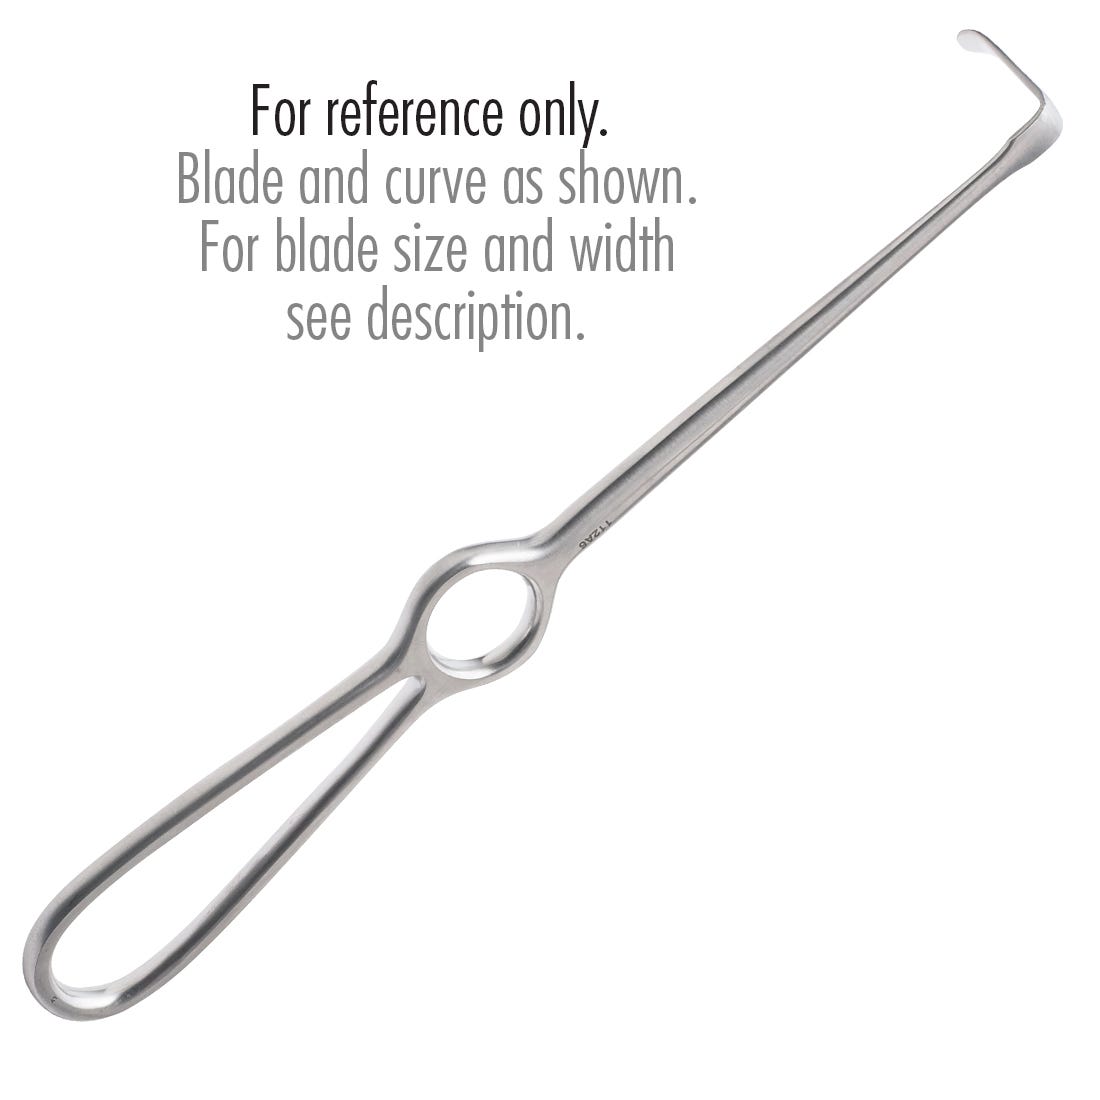 Obwegeser Type Surgical Retractor Standard, Curved Down, 14mm x 70mm